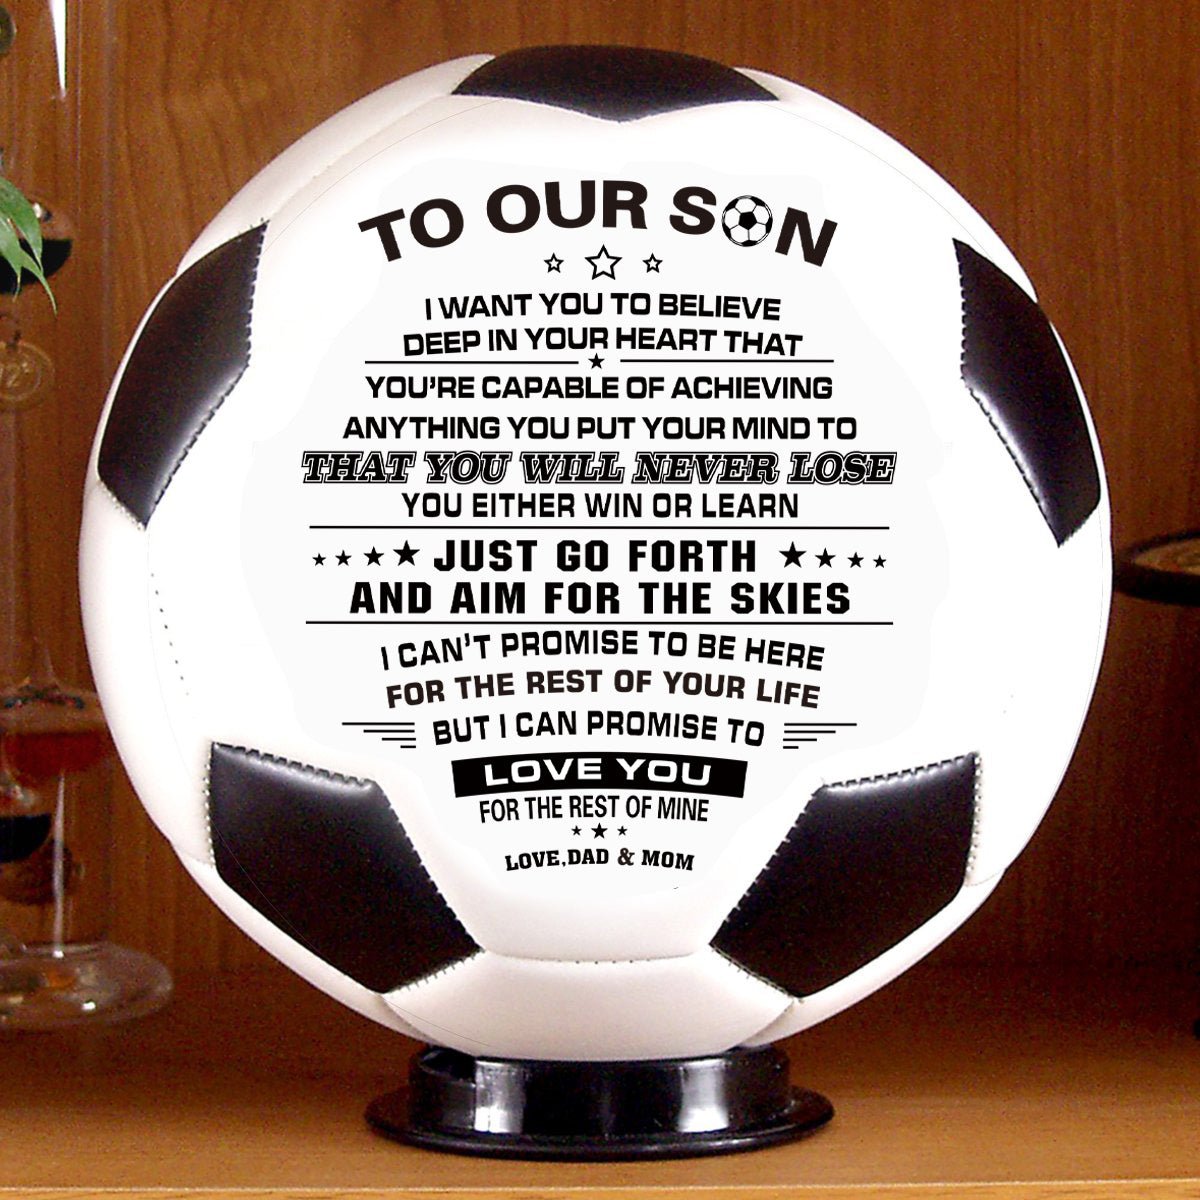 Personalized Printed Soccer Ball Football For My Son, Birthday Christmas Graduation Gift For Son From Dad, Perfect For Outdoor & Indoor Match Or Game，Size 5 - Family Watchs